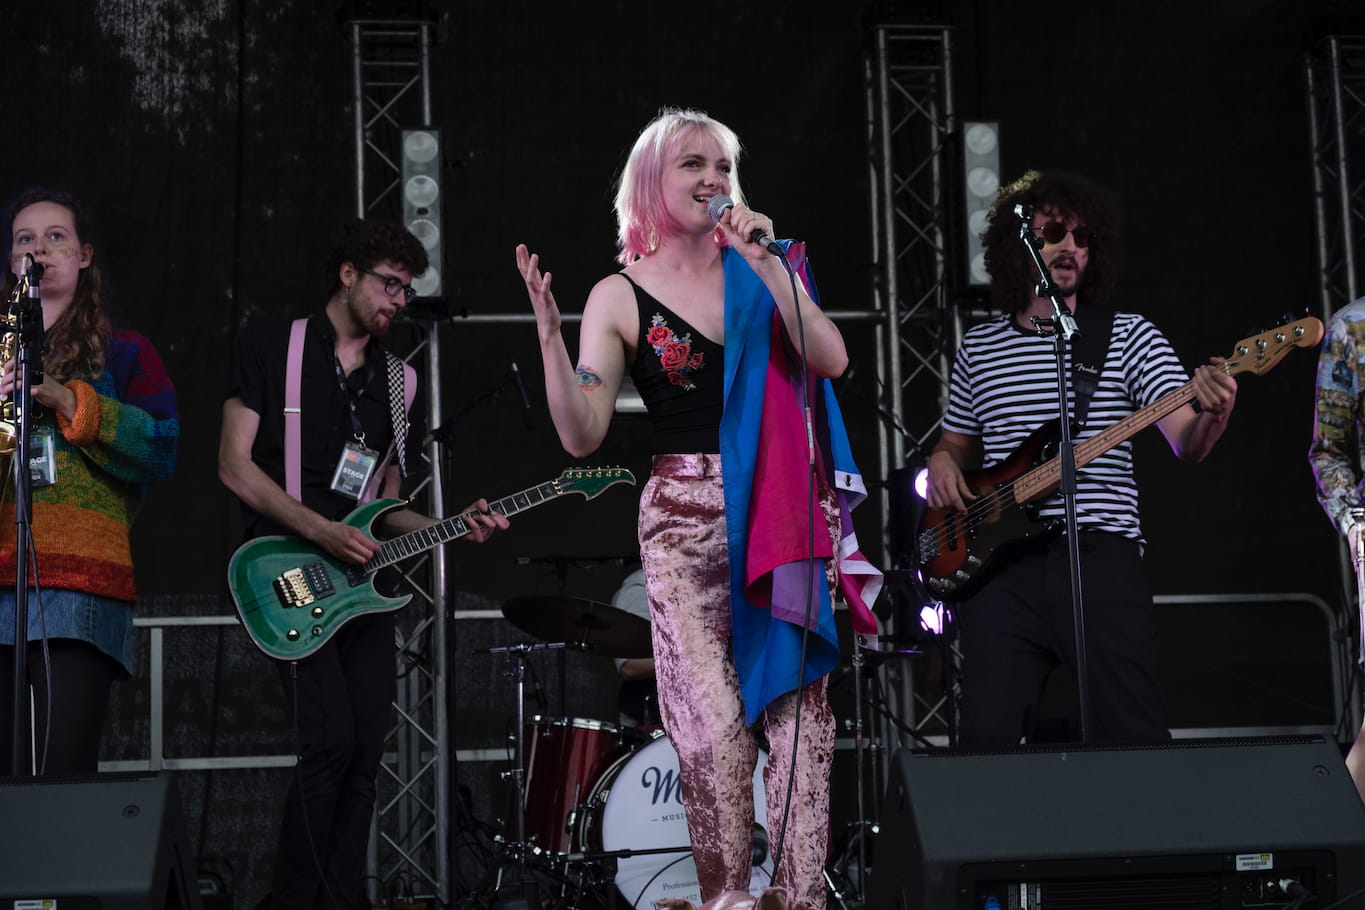 Our singer, Jazz, sings on stage at Cambridge Pride while draped in a flag representing bisexuality